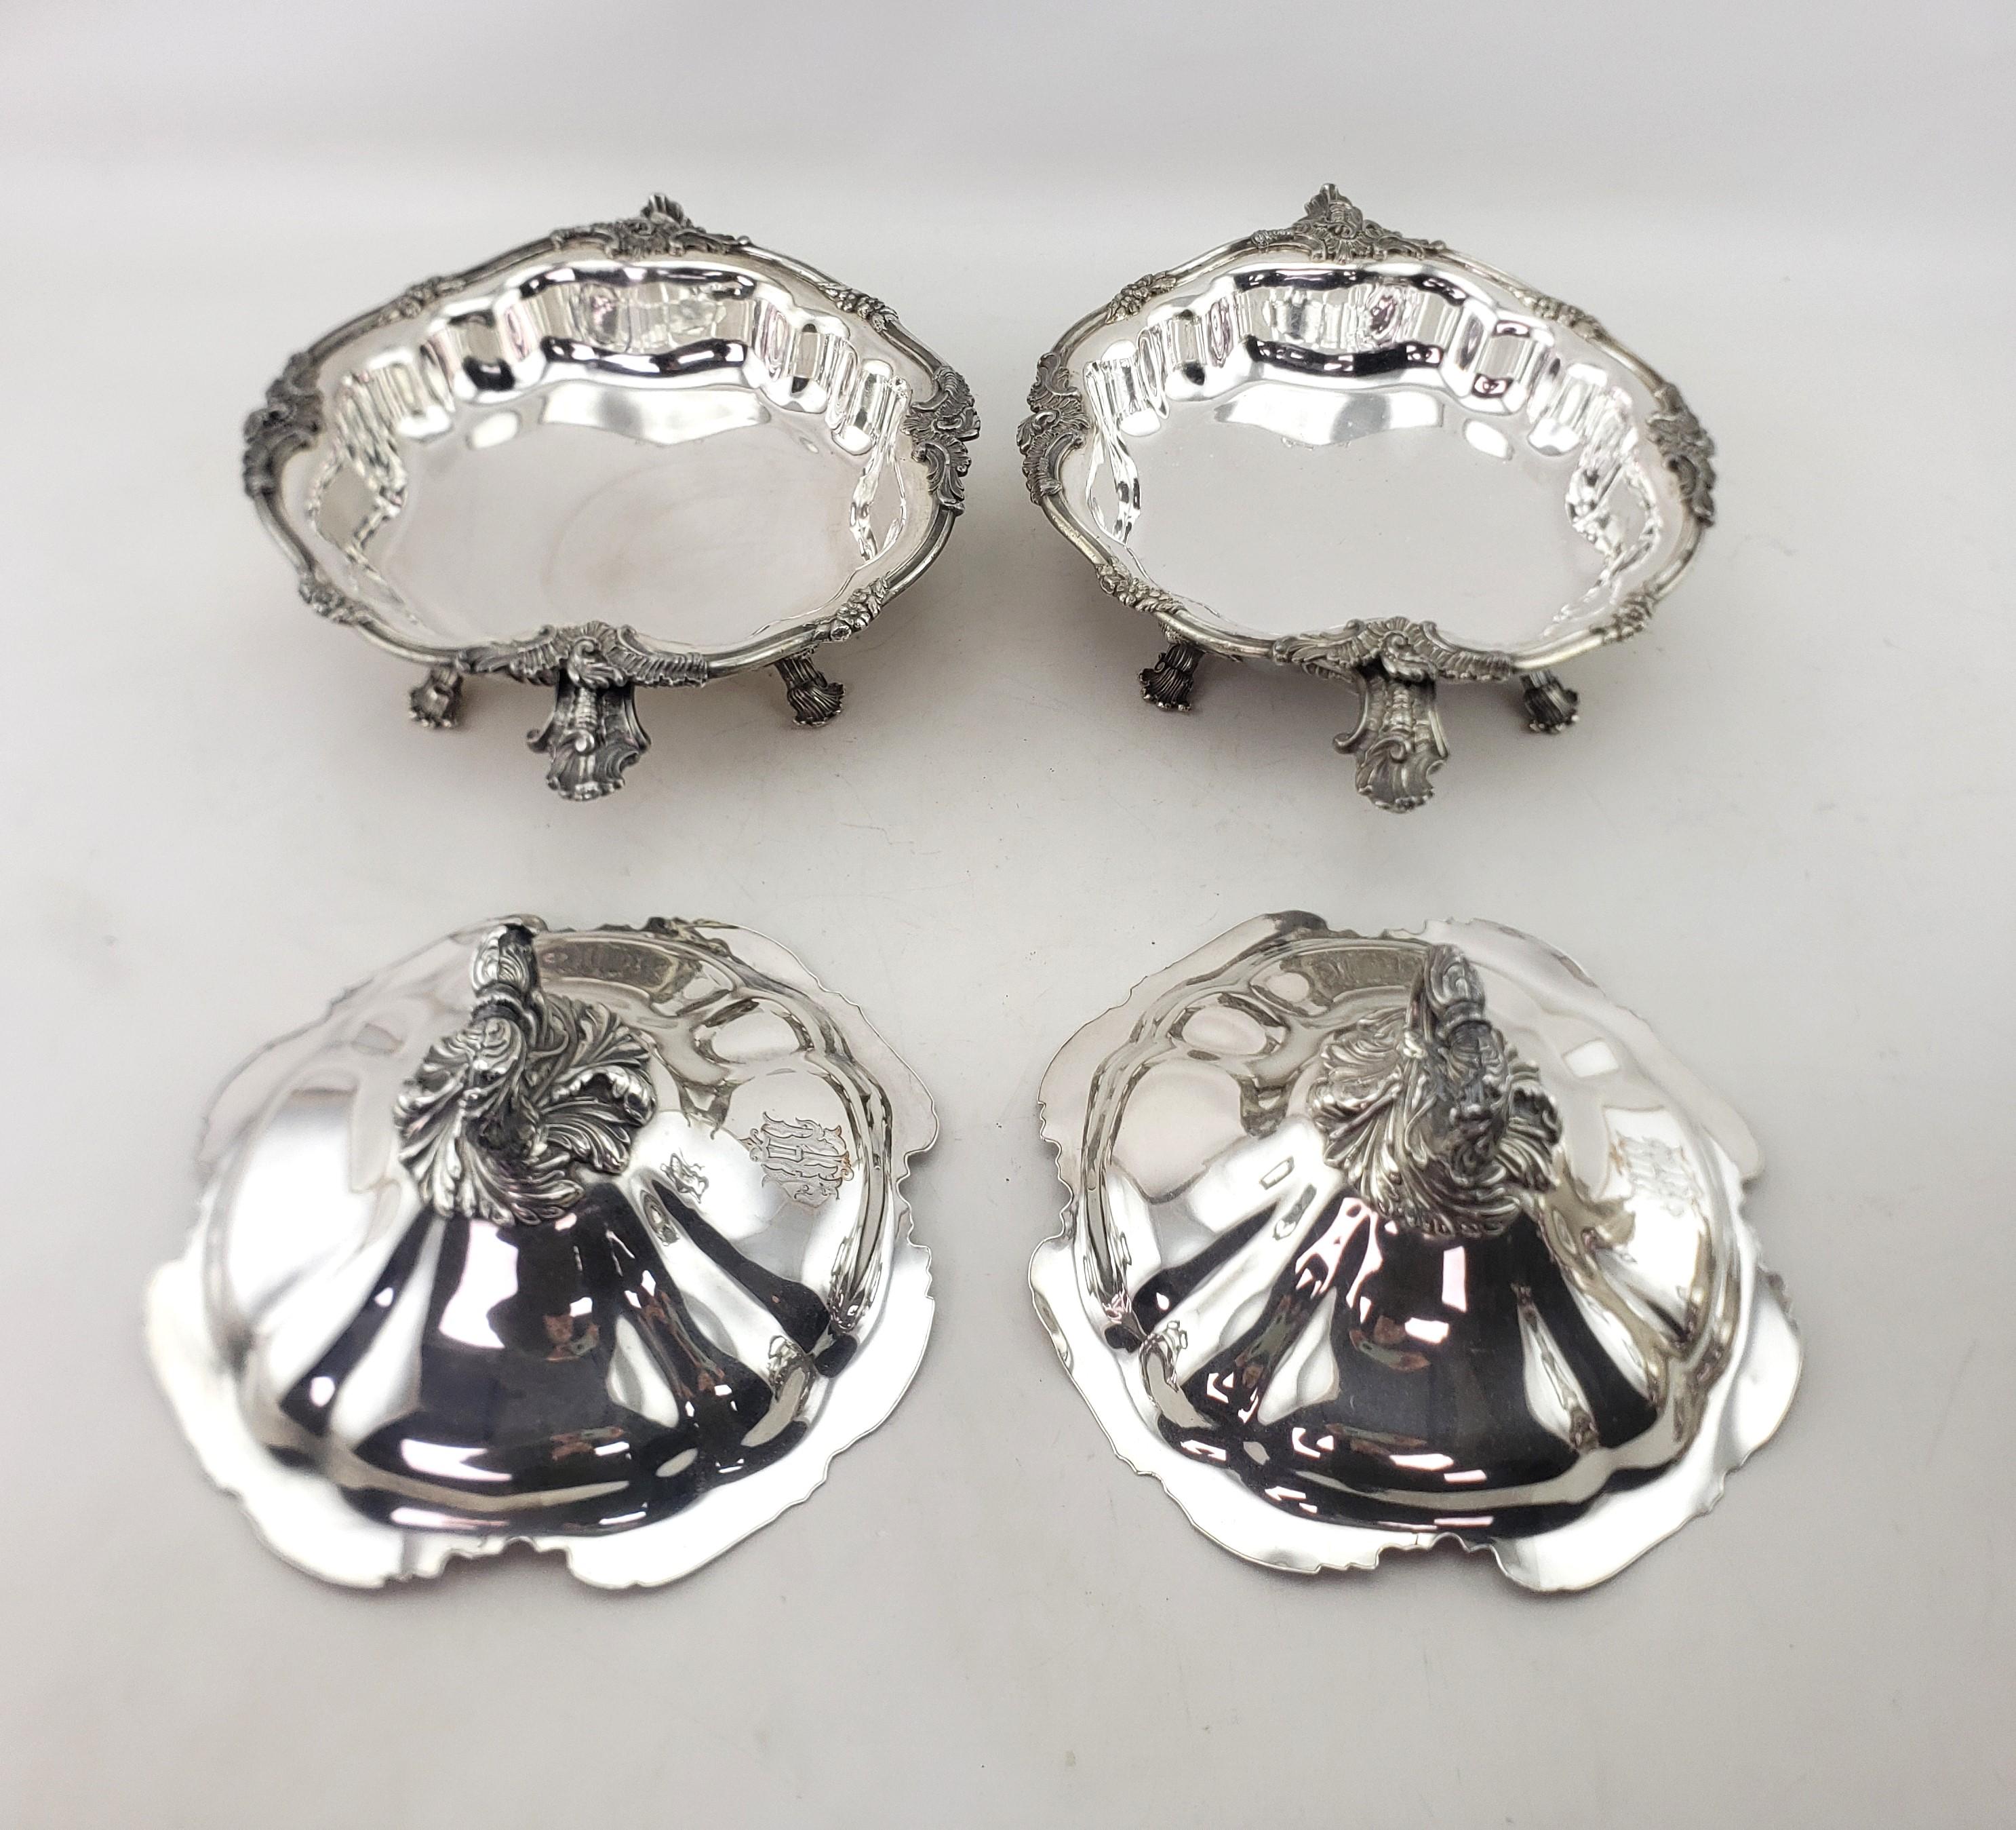 Three Antique Georgian Sheffield Plated Covered Tureens with Floral Decoration For Sale 10